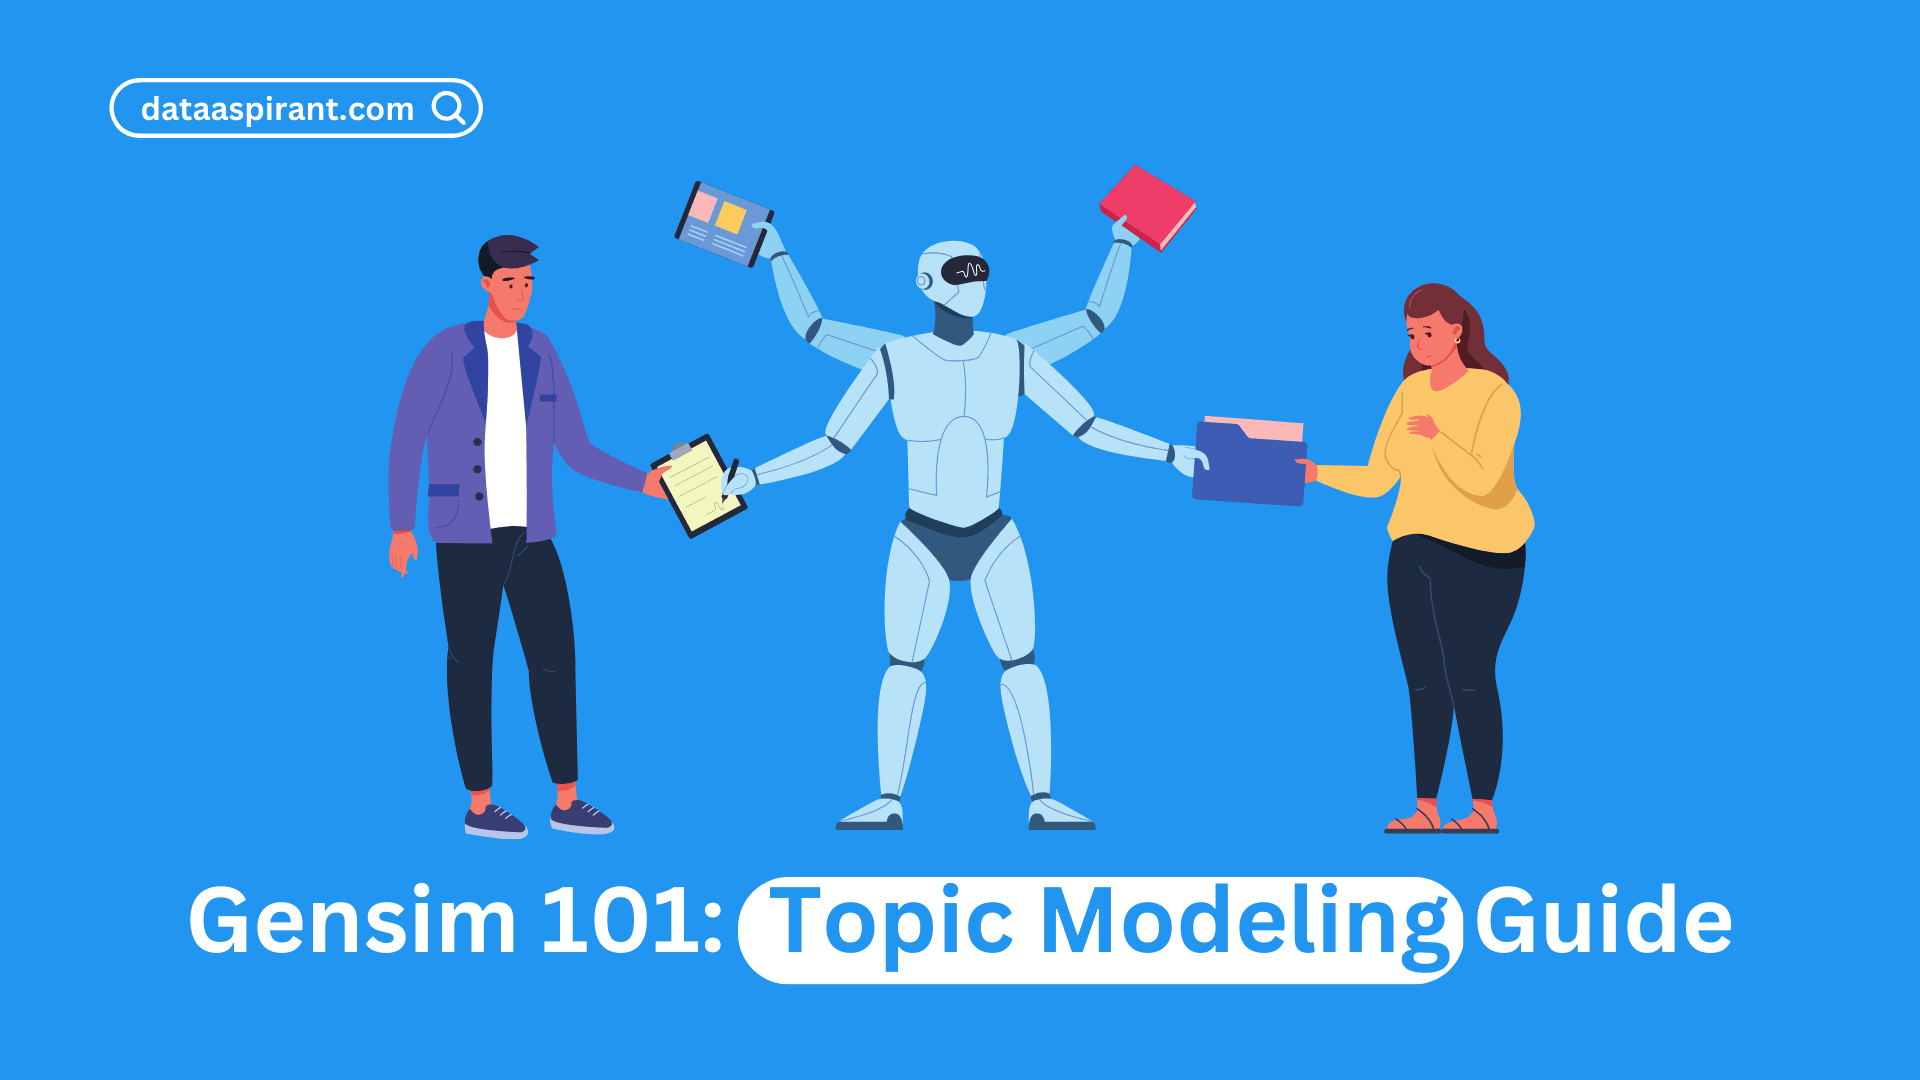 Gensim 101: A Beginner's Guide For Understanding and Implementing Topic Modeling